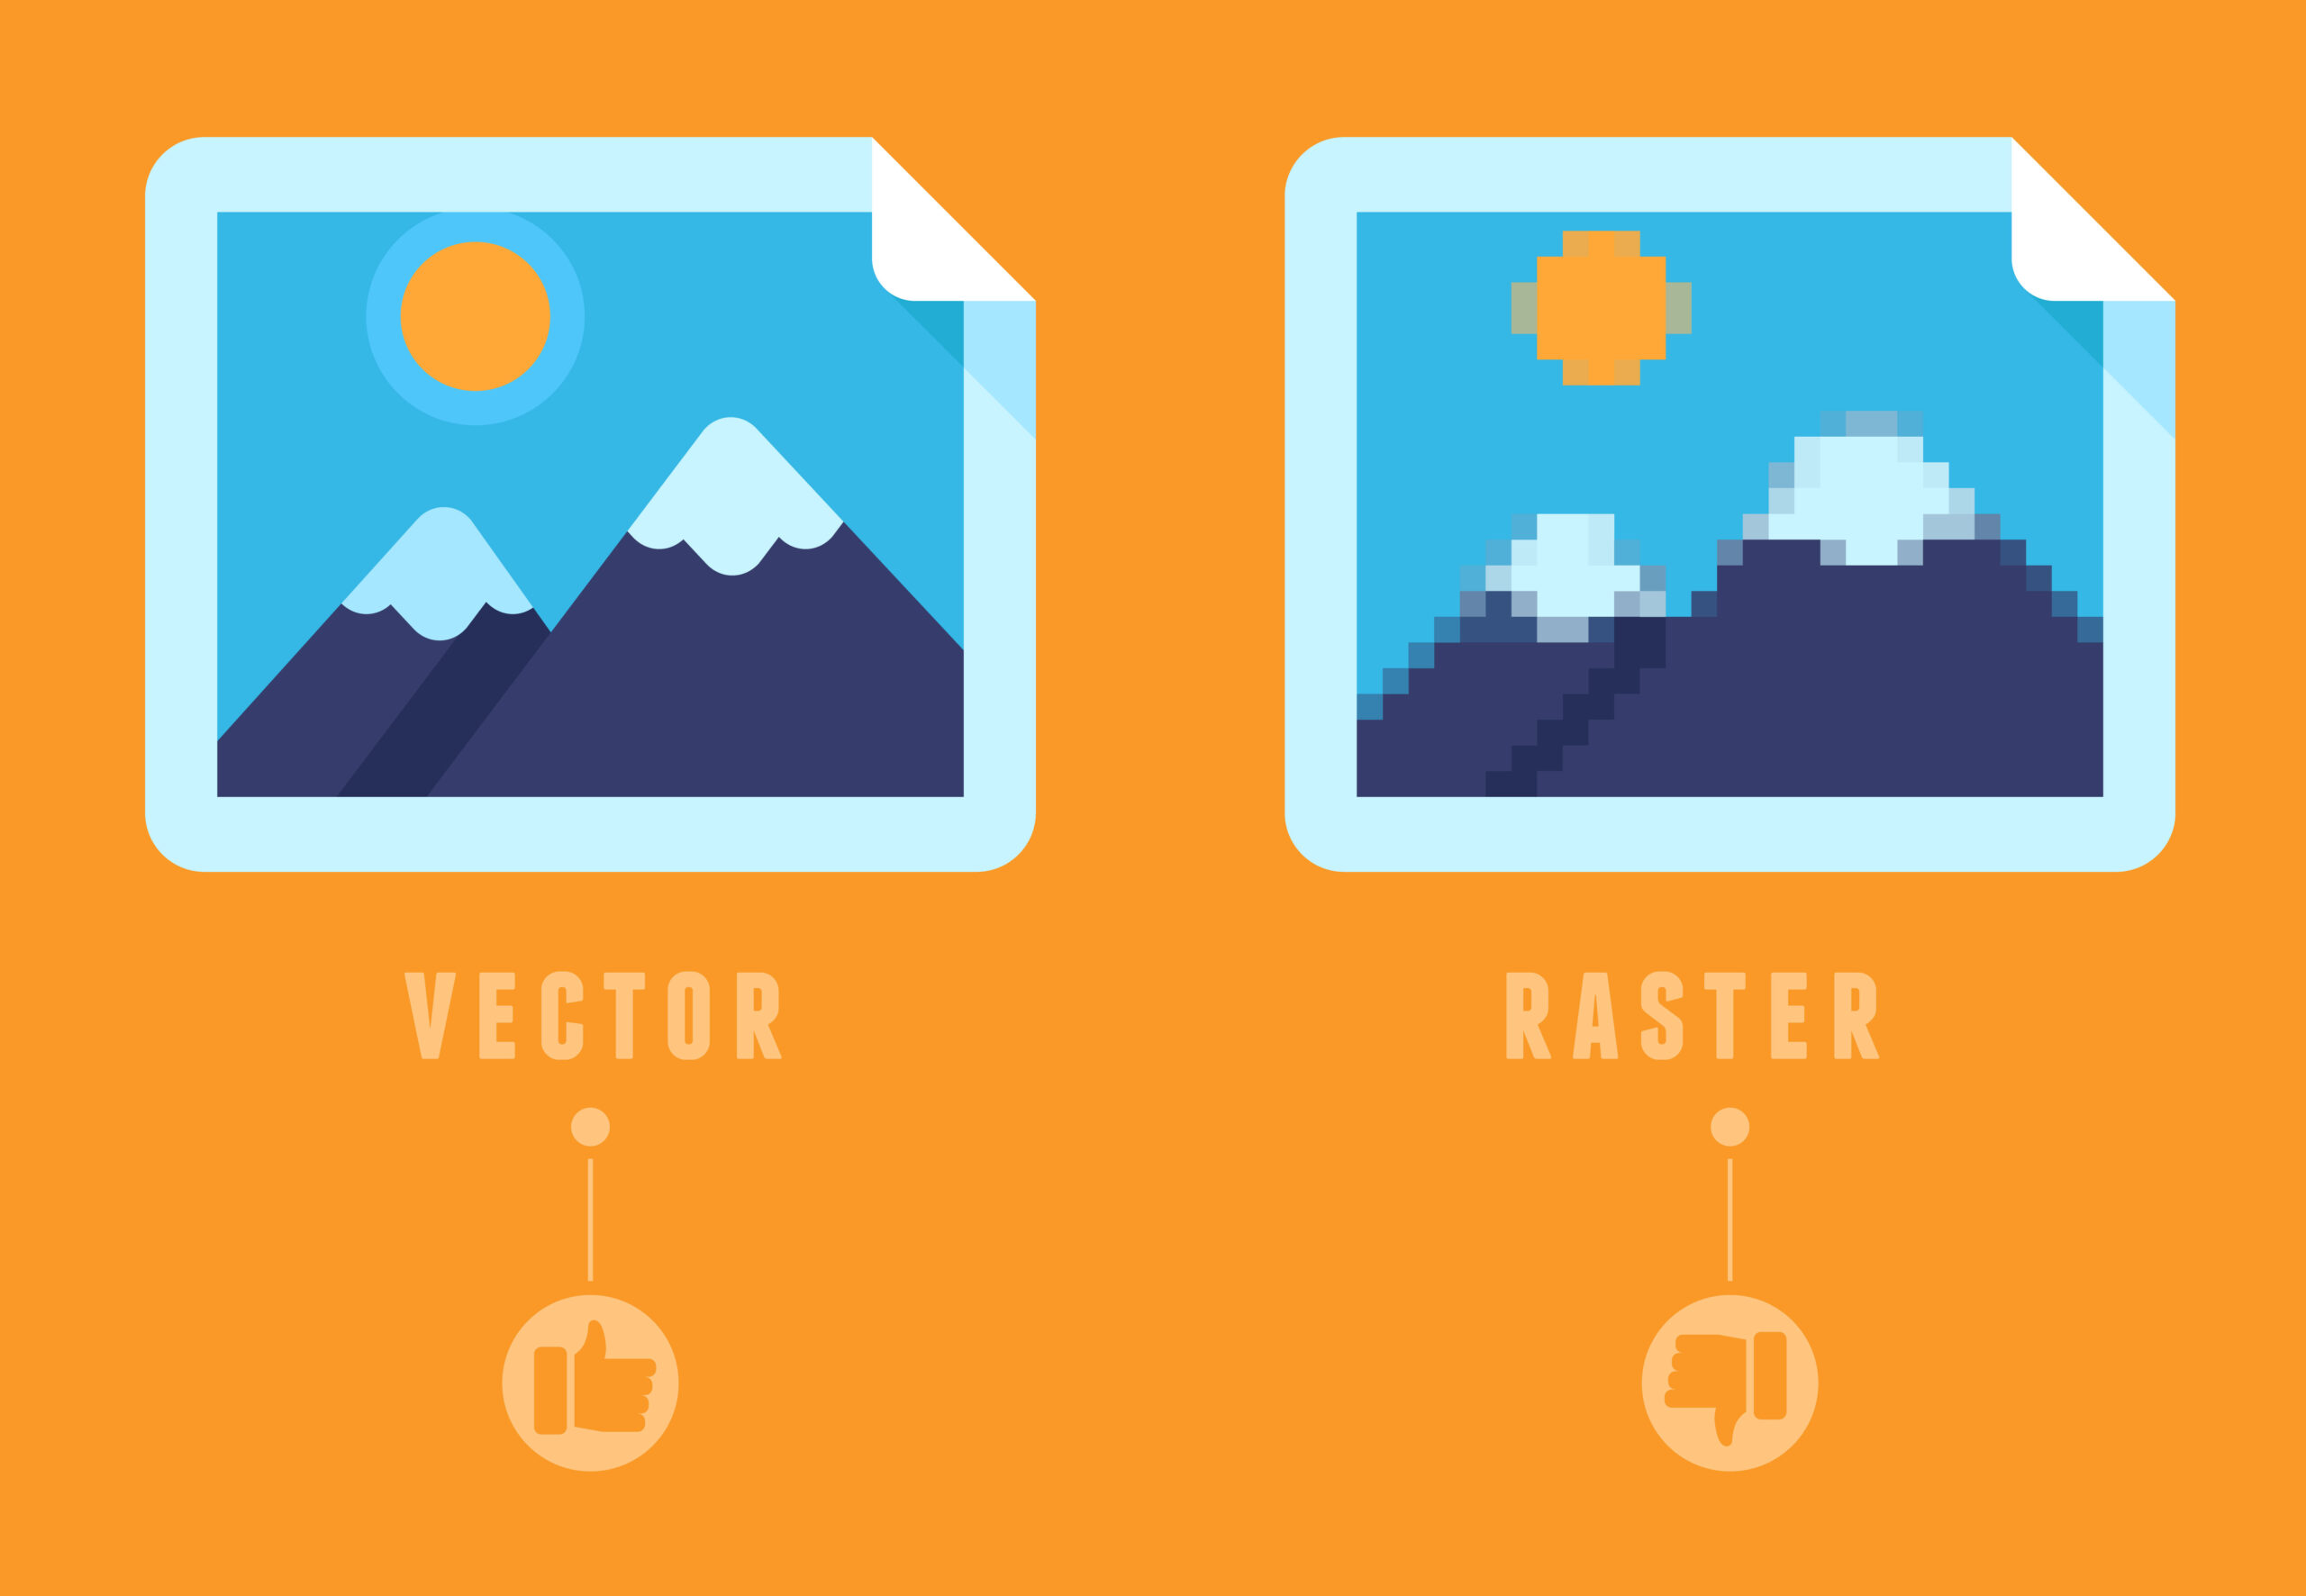 picture showing difference between vector vs raster images